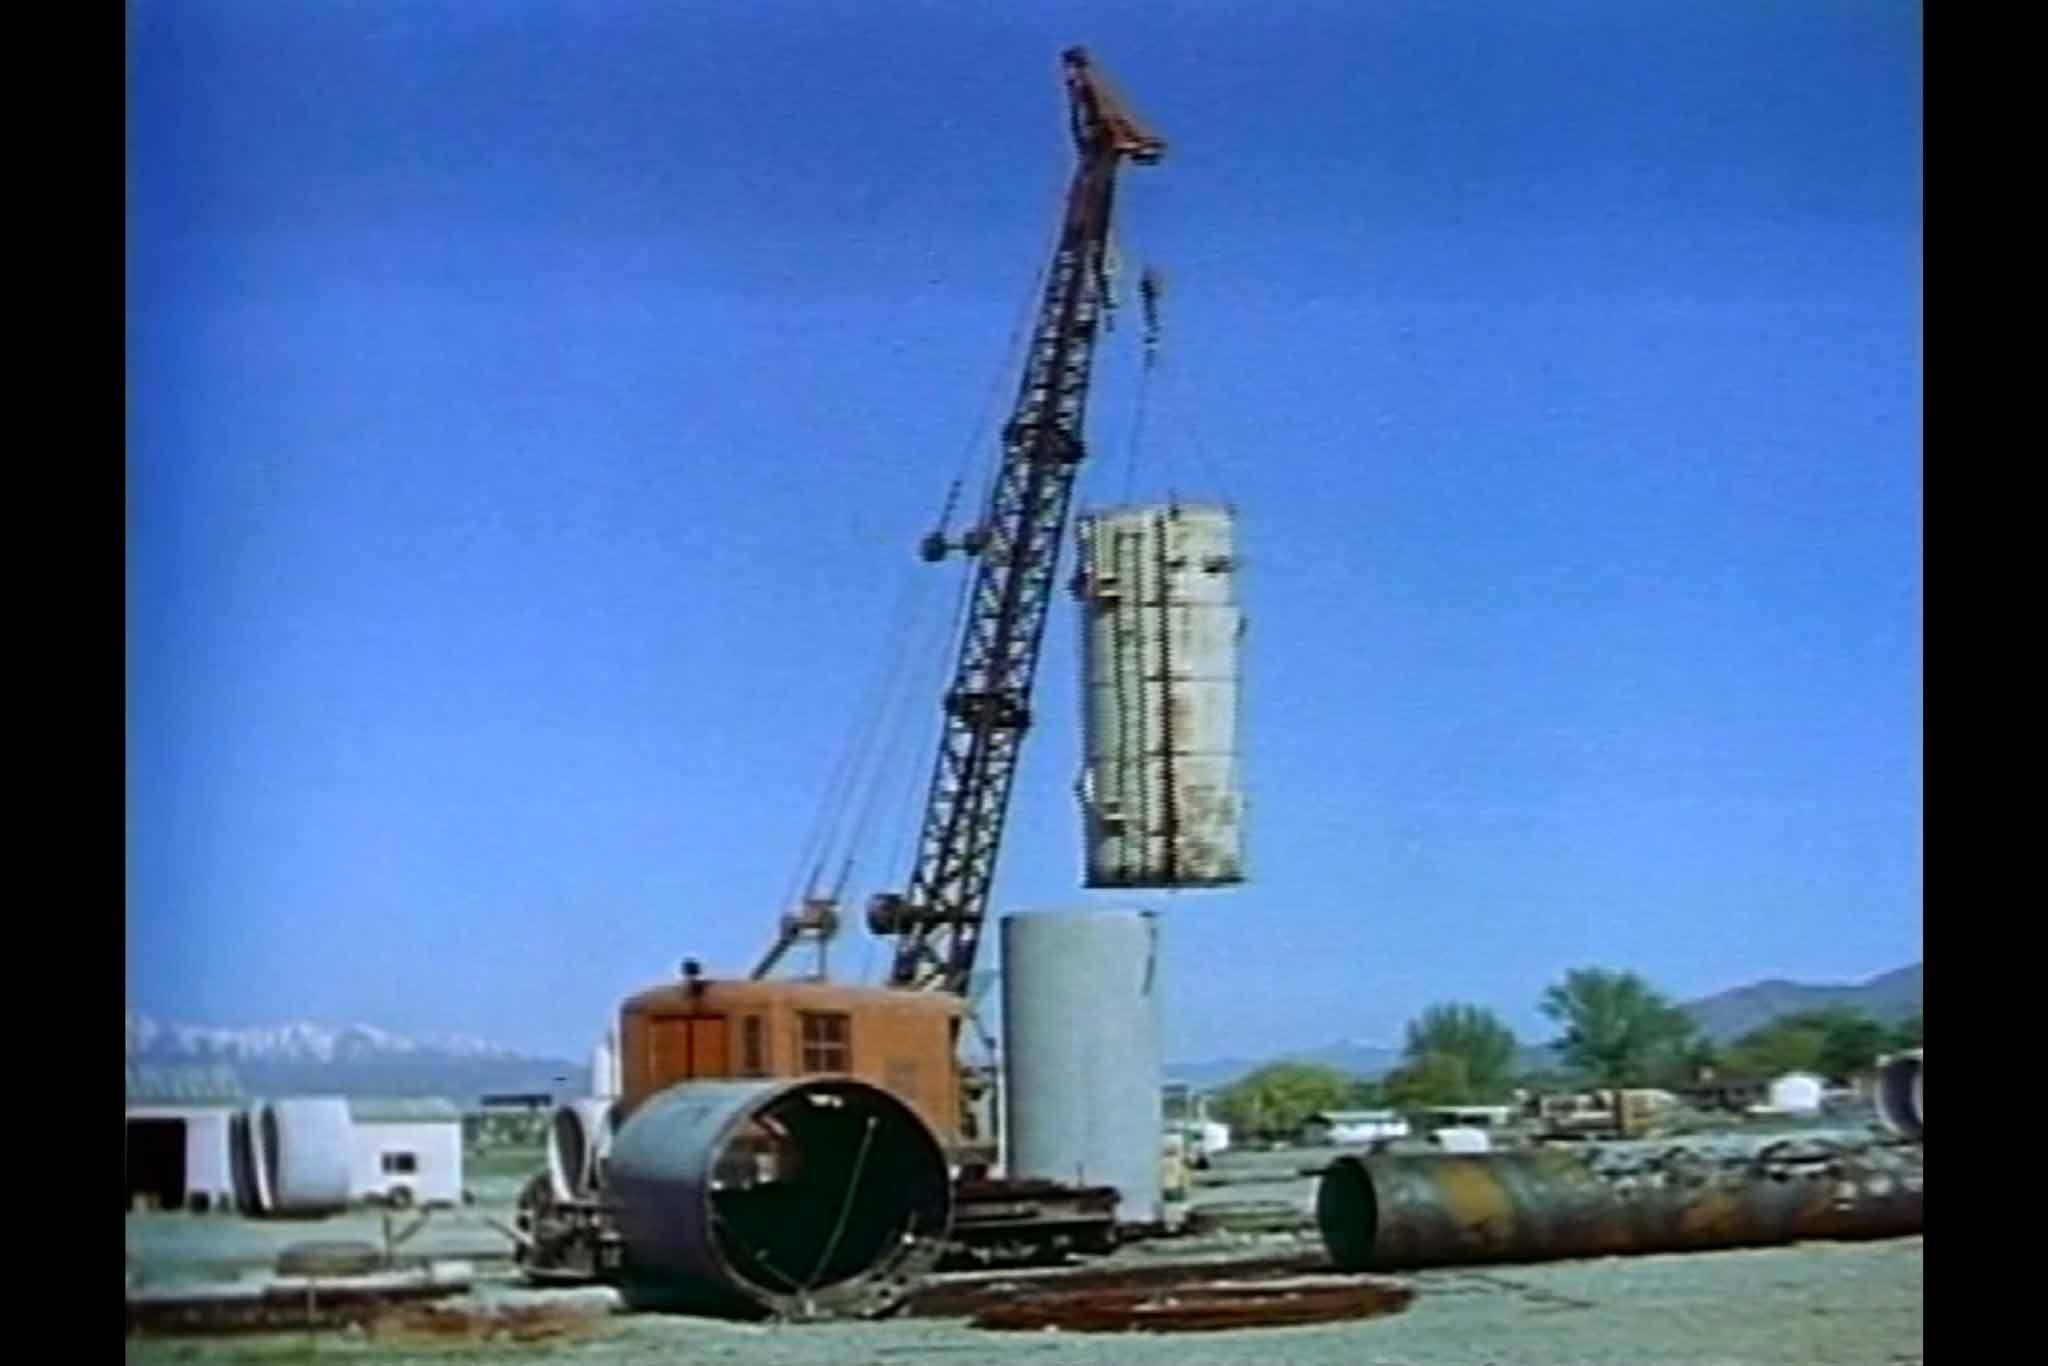 A film still from the construction of Holt's Sun Tunnels from the film, Sun Tunnels.